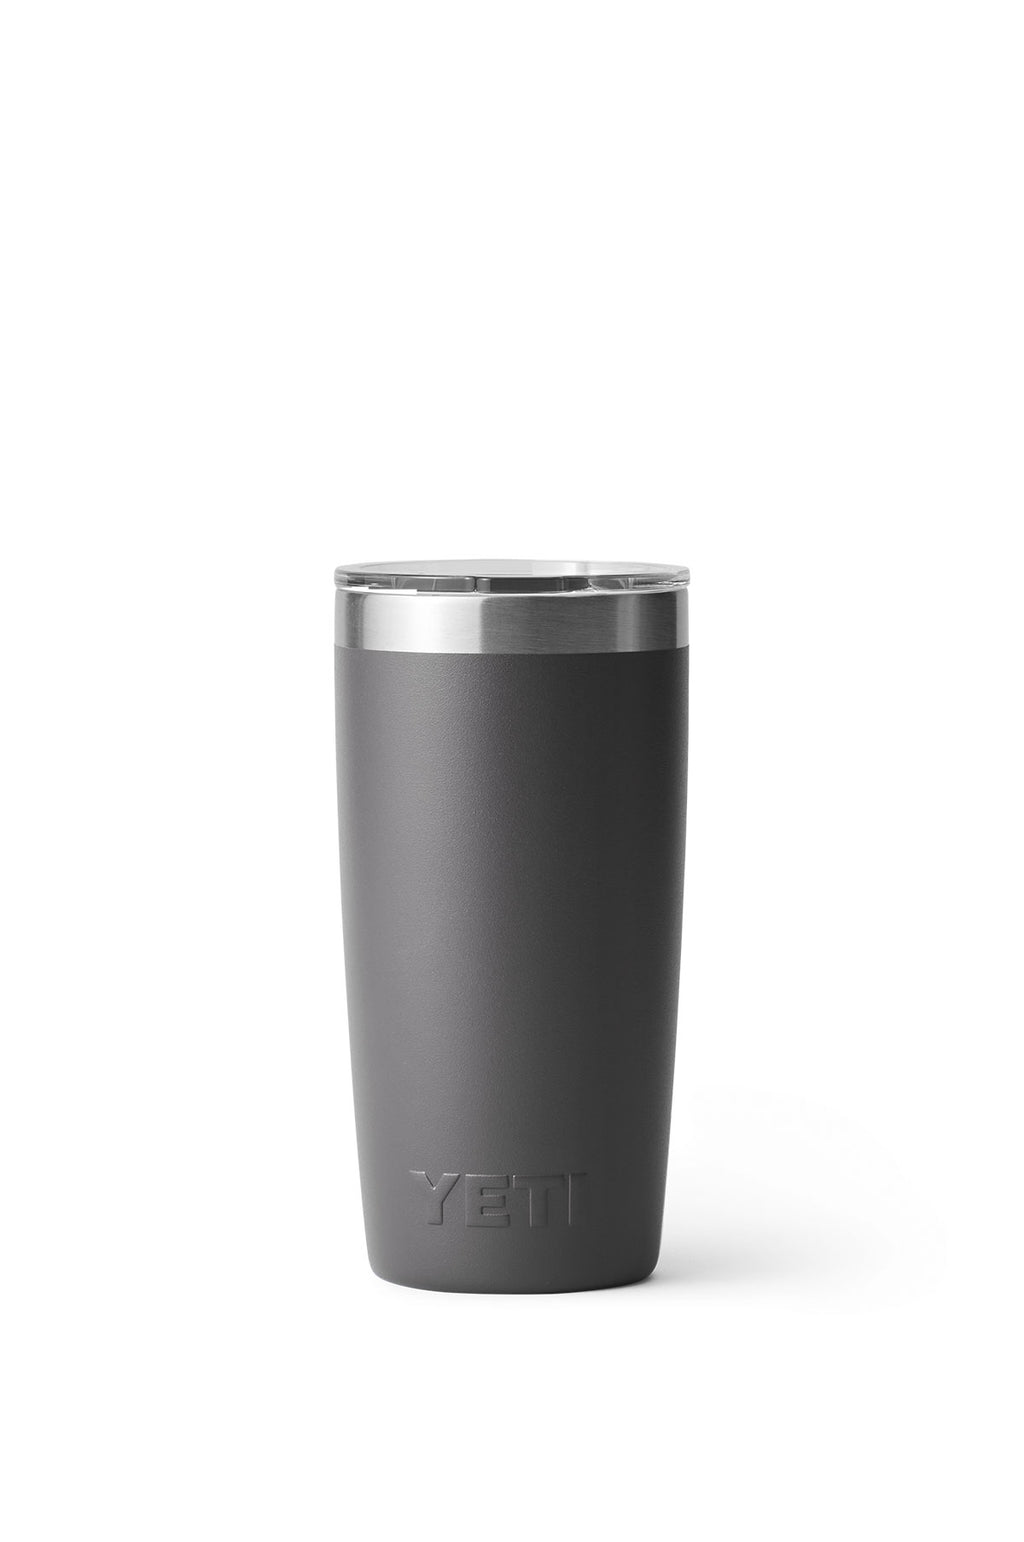 Get your Charcoal Yeti Tumbler at Sand Dollar Lifestyles